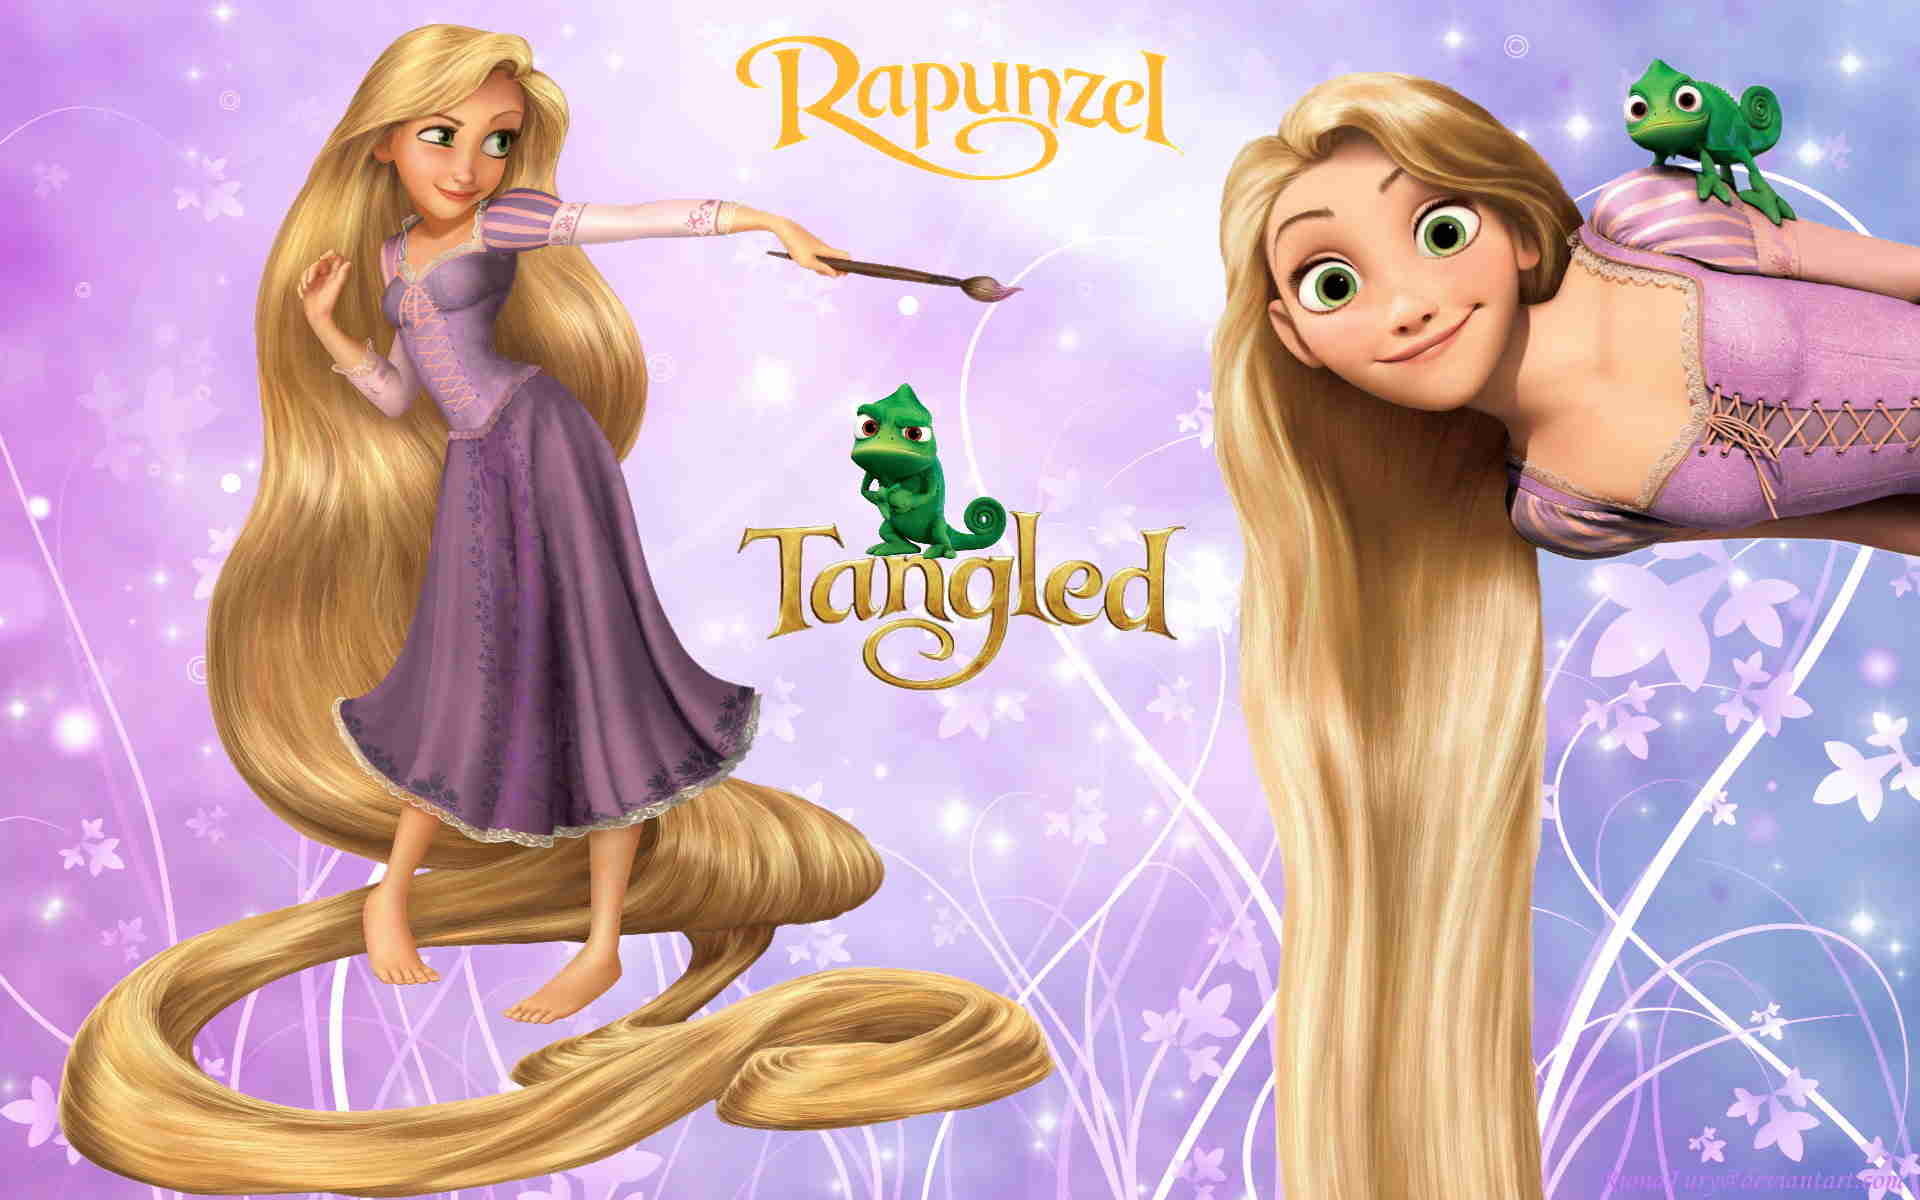 1920x1200 HD Wallpaper and background photos of Disney Princess Rapunzel for fans of Tangled  images.